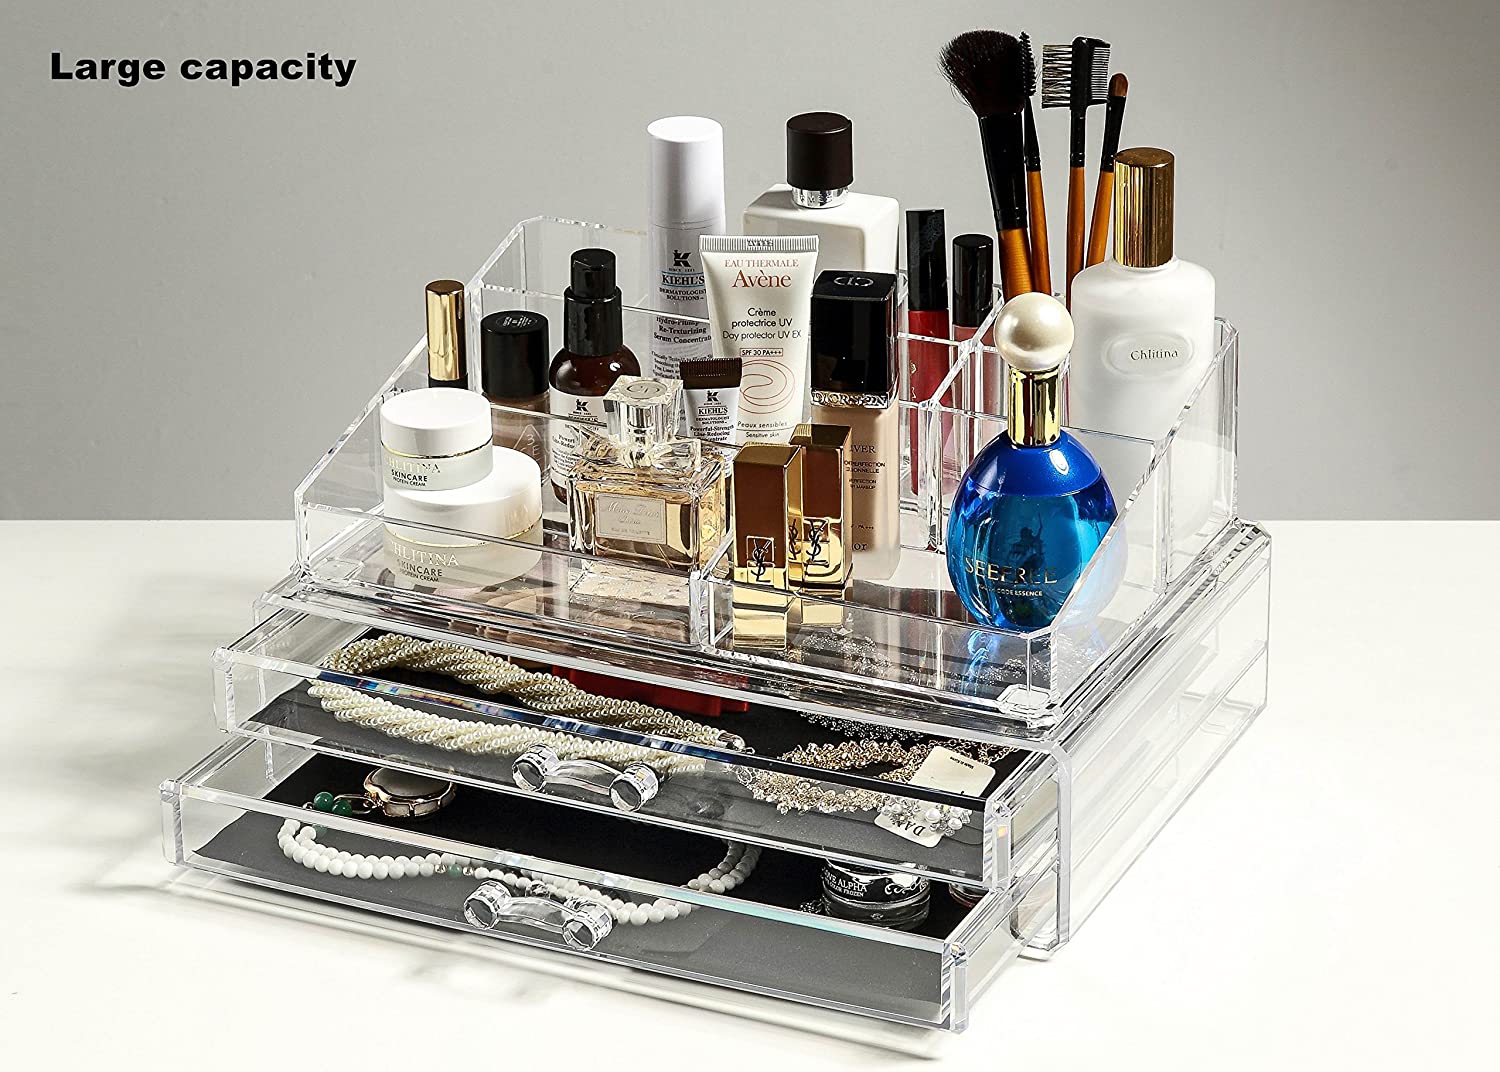 Jewelry and Cosmetic Acrylic Storage, Large Size 13.5x9.0 x 6.9 Inch, Makeup Organizer 2 Sets